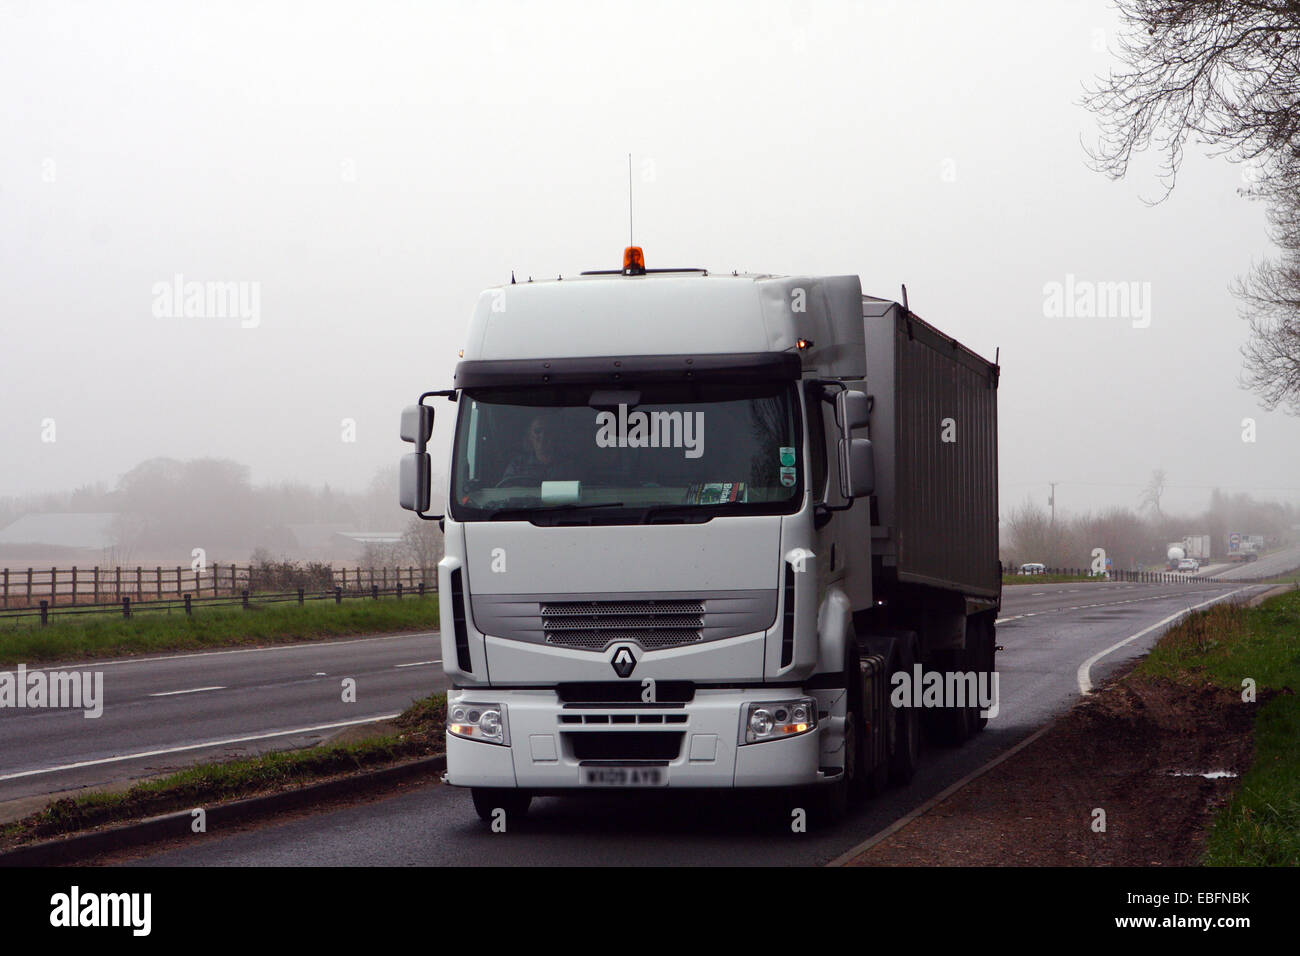 An unmarked articulated Renault truck traveling into a layby on the A417 dual carriageway in The Cotswolds, England Stock Photo